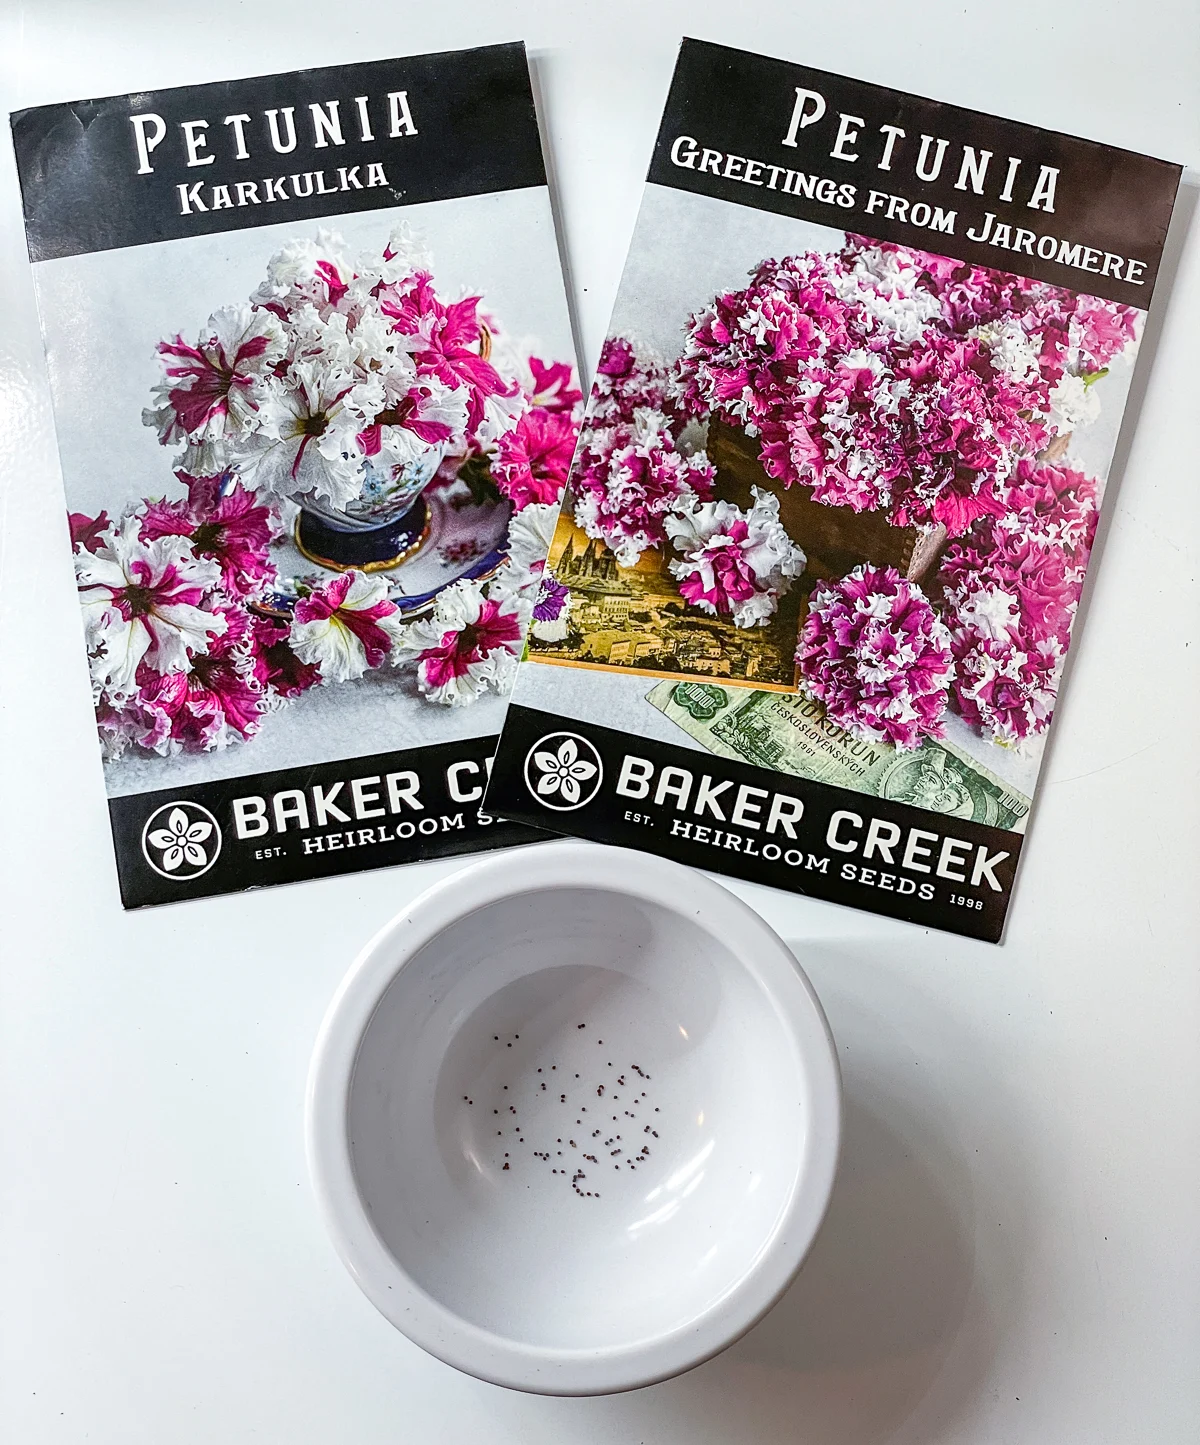 two petunia seed packets from Baker Creek with bowl of petunia seeds